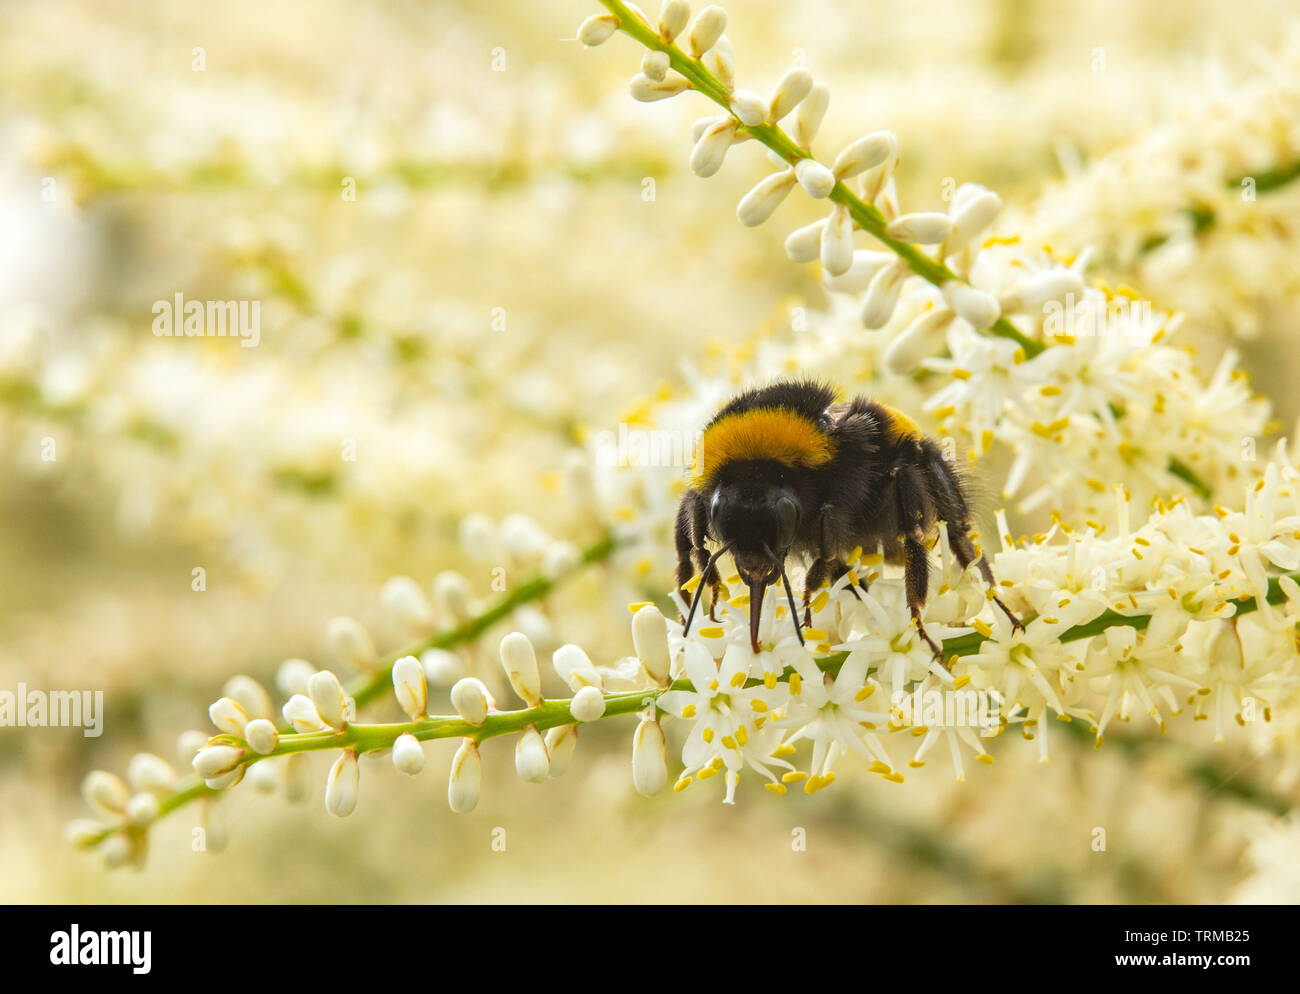 A bee uses it's proboscis to feast on the pollen and nectar from the panicle flowers of cordyline australis, in a Devon garden. Stock Photo